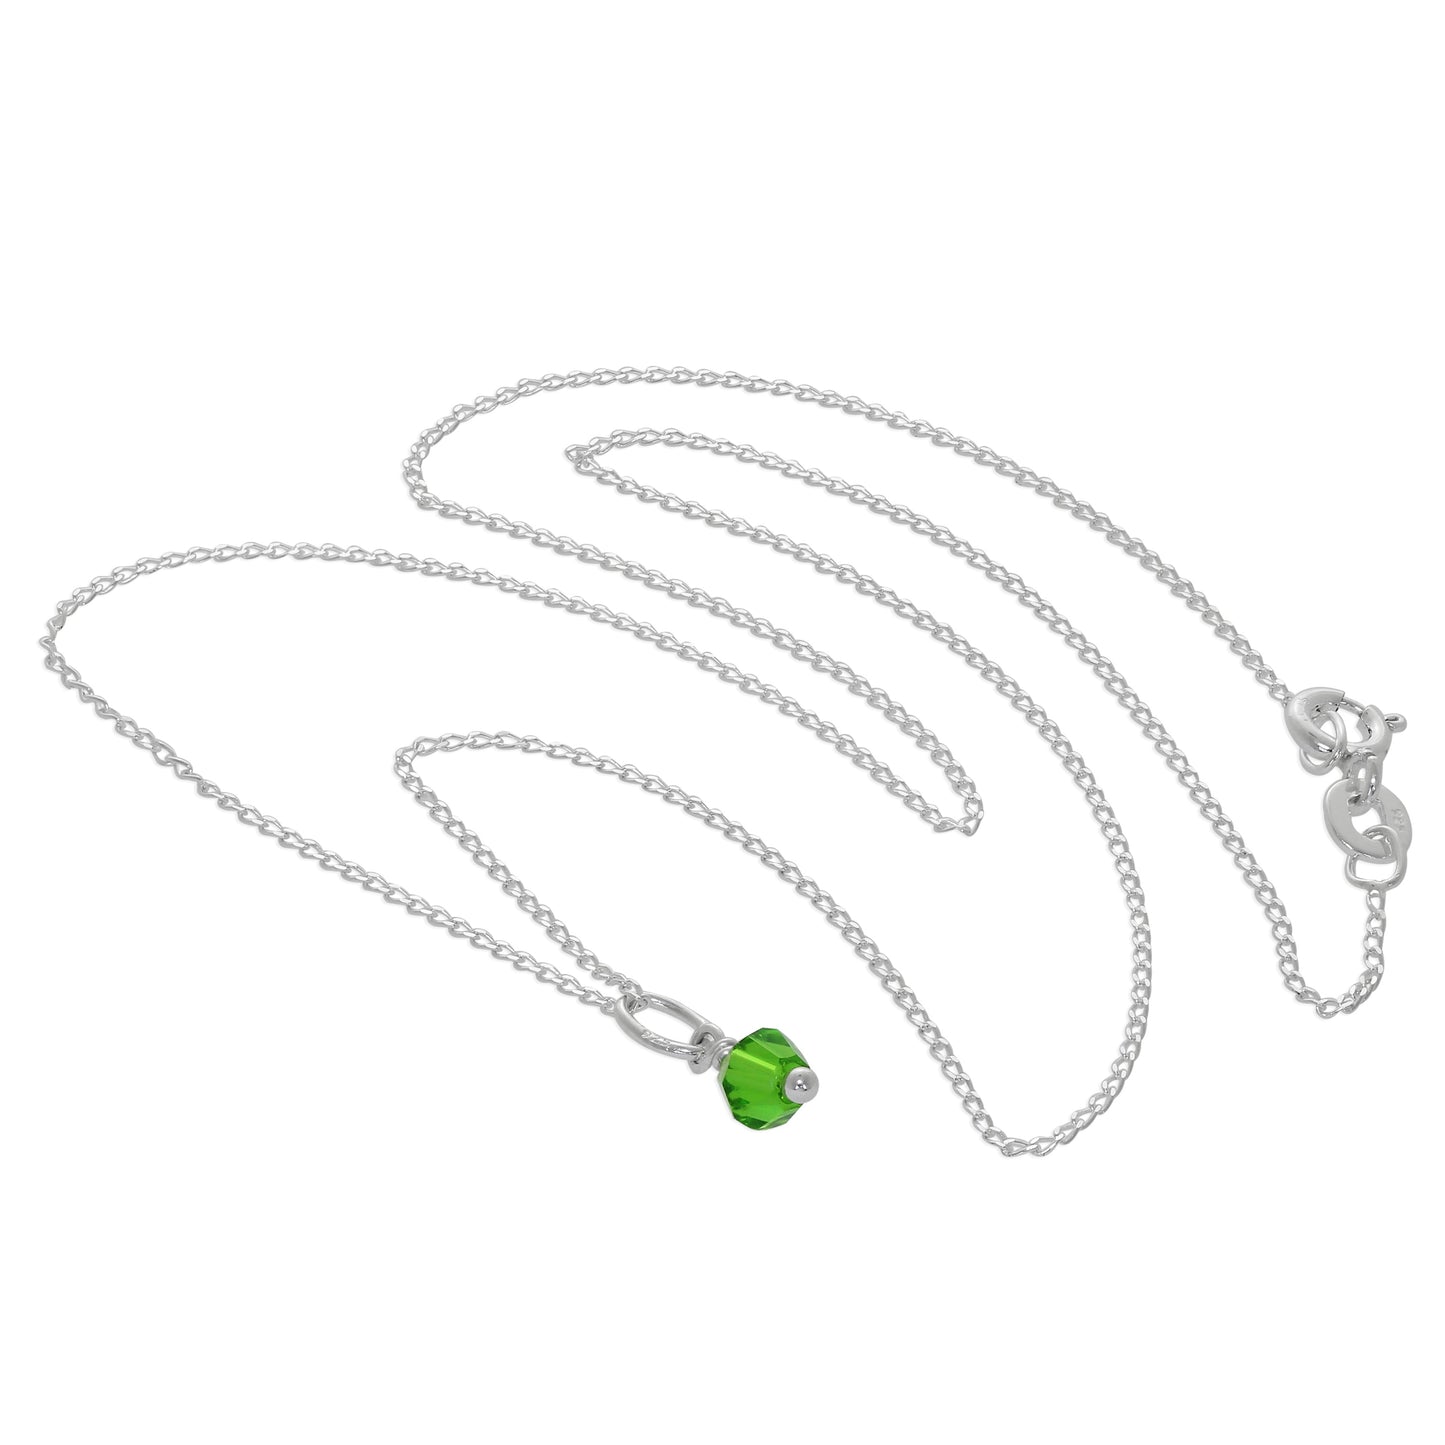 Sterling Silver & Green Crystal Bead Necklace - 14 - 22 Inches